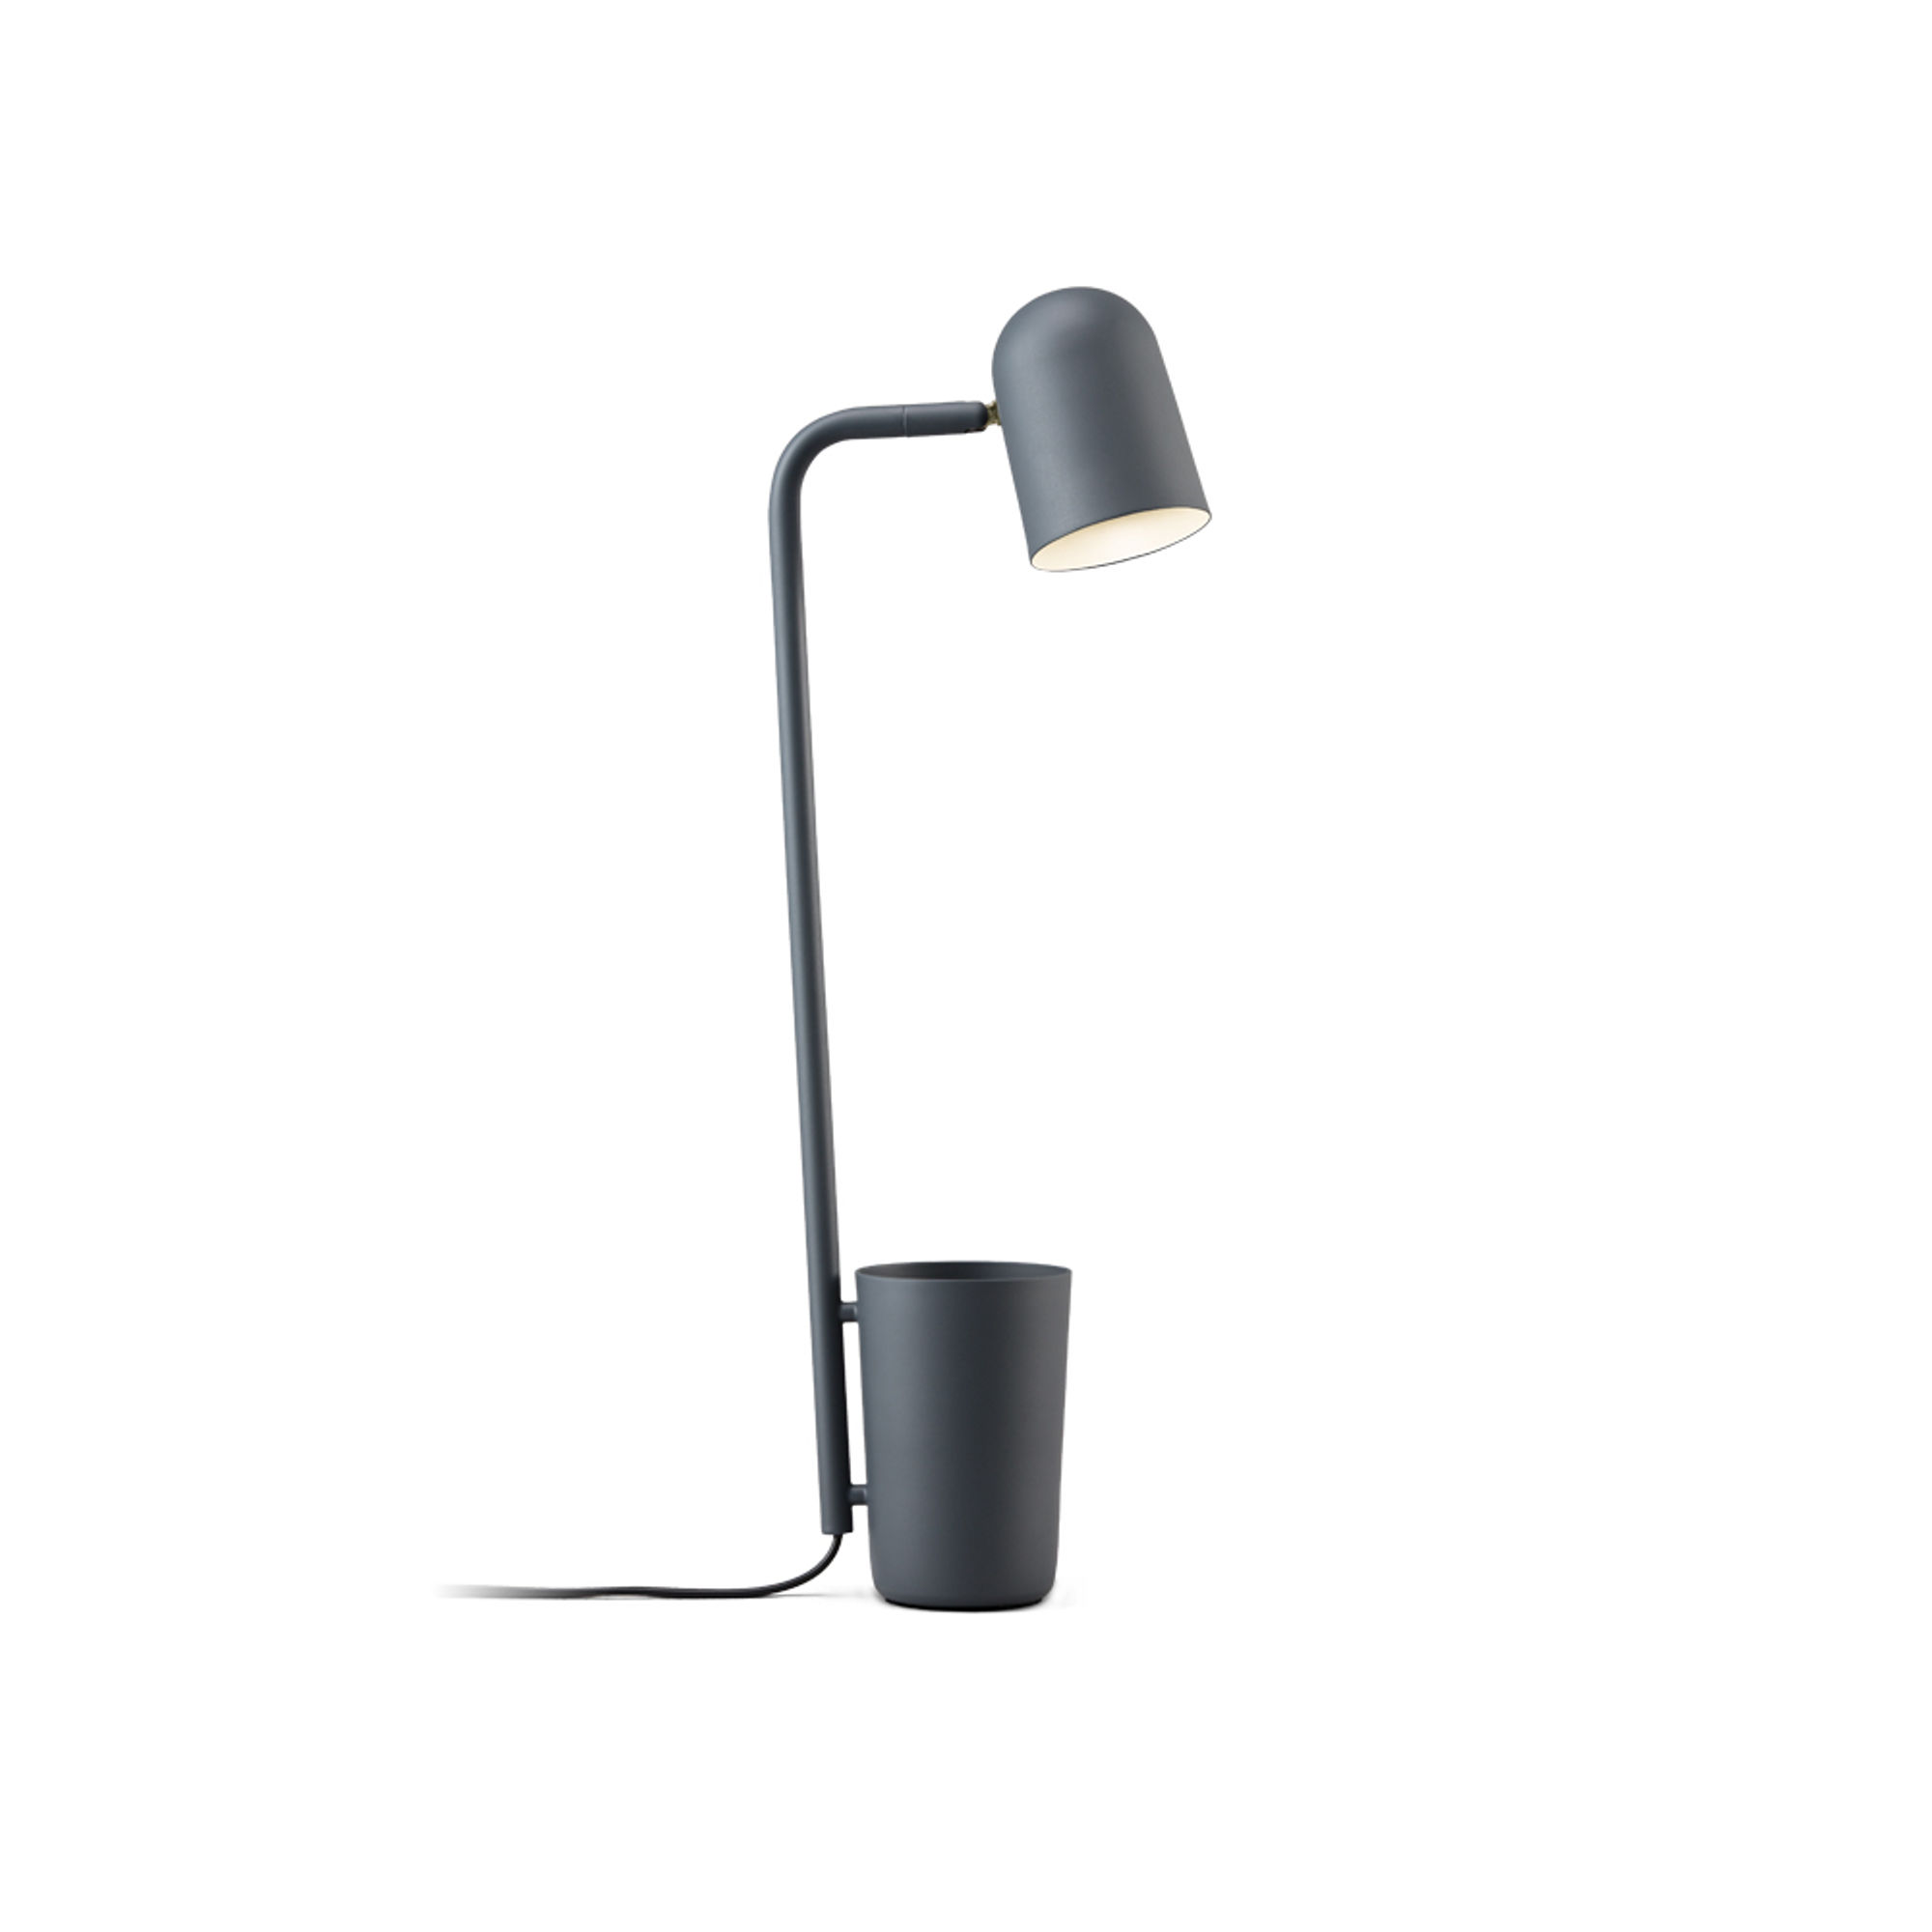 The Buddy Table Lamp by Northern 0